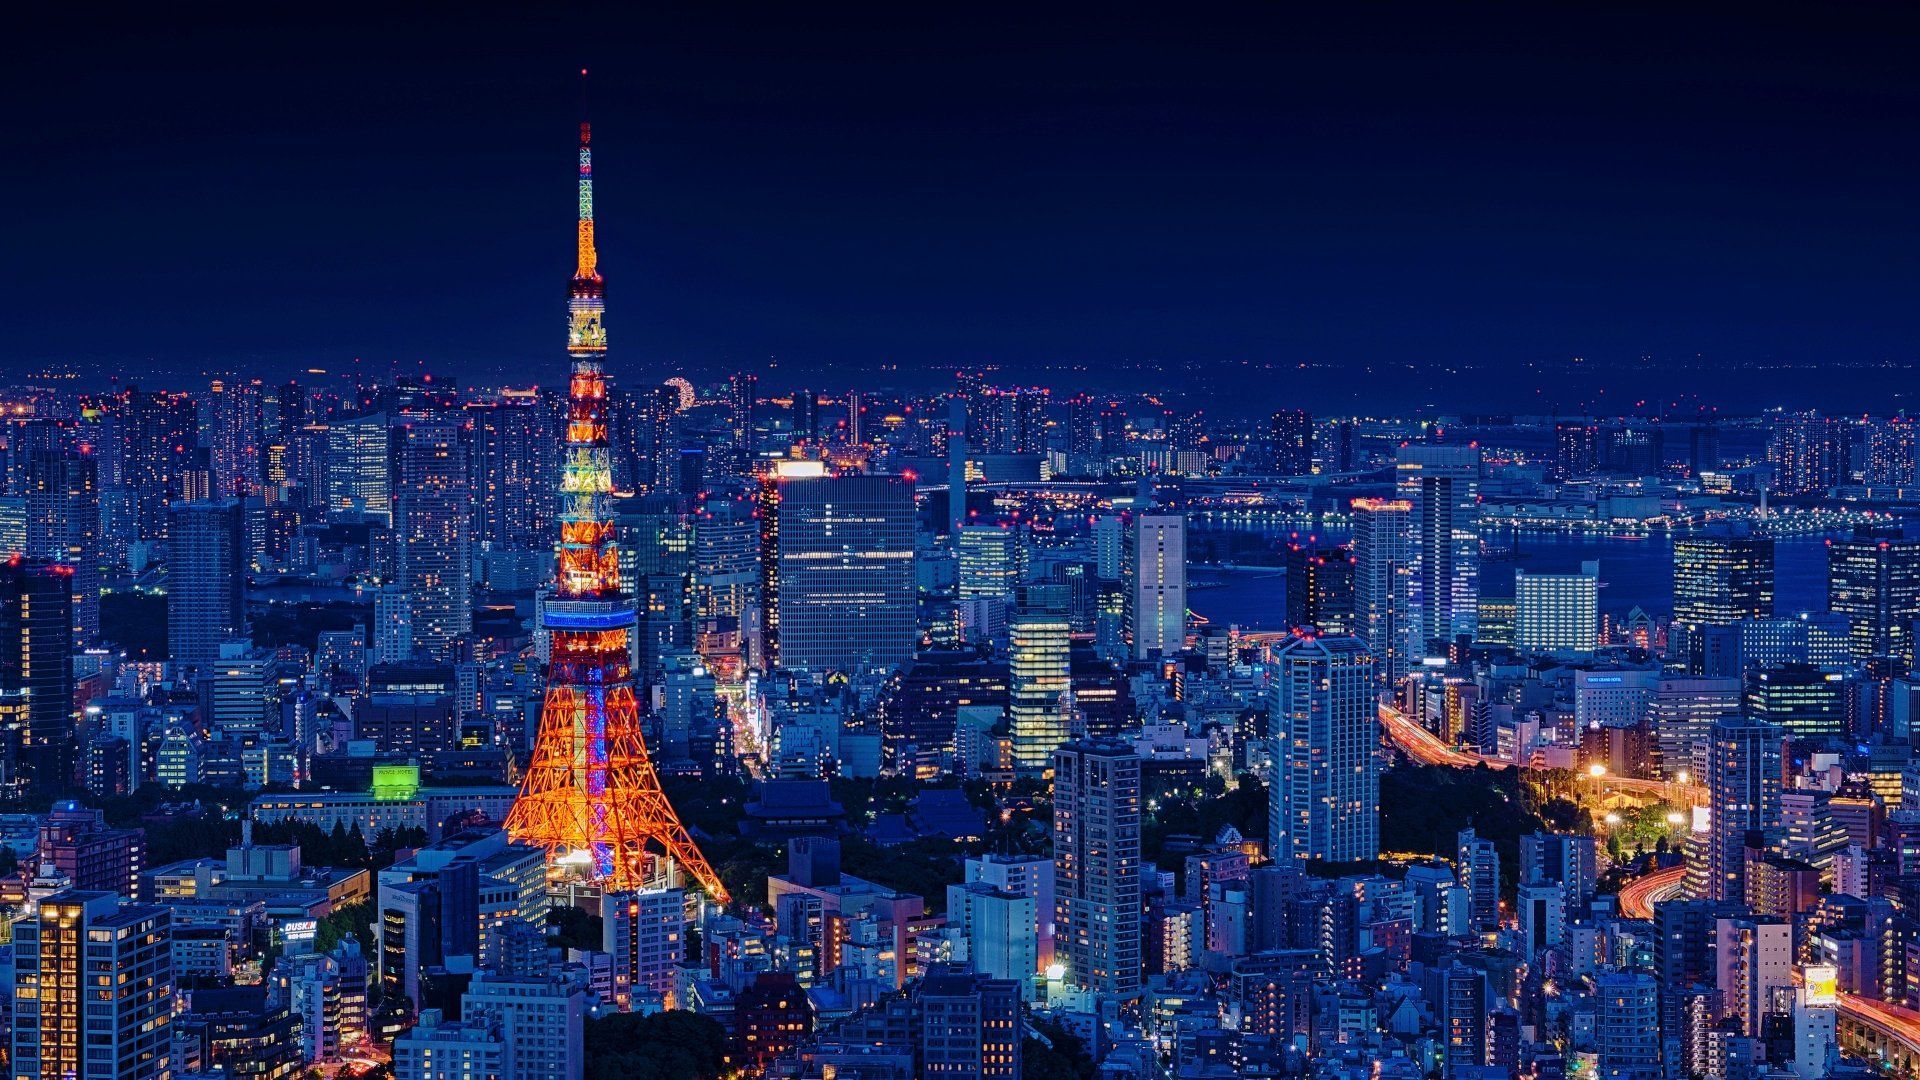 Tokyo at Night Wallpaper Background Image. View, download, comment, and rate. Tokyo tower, Tokyo city, 4k picture